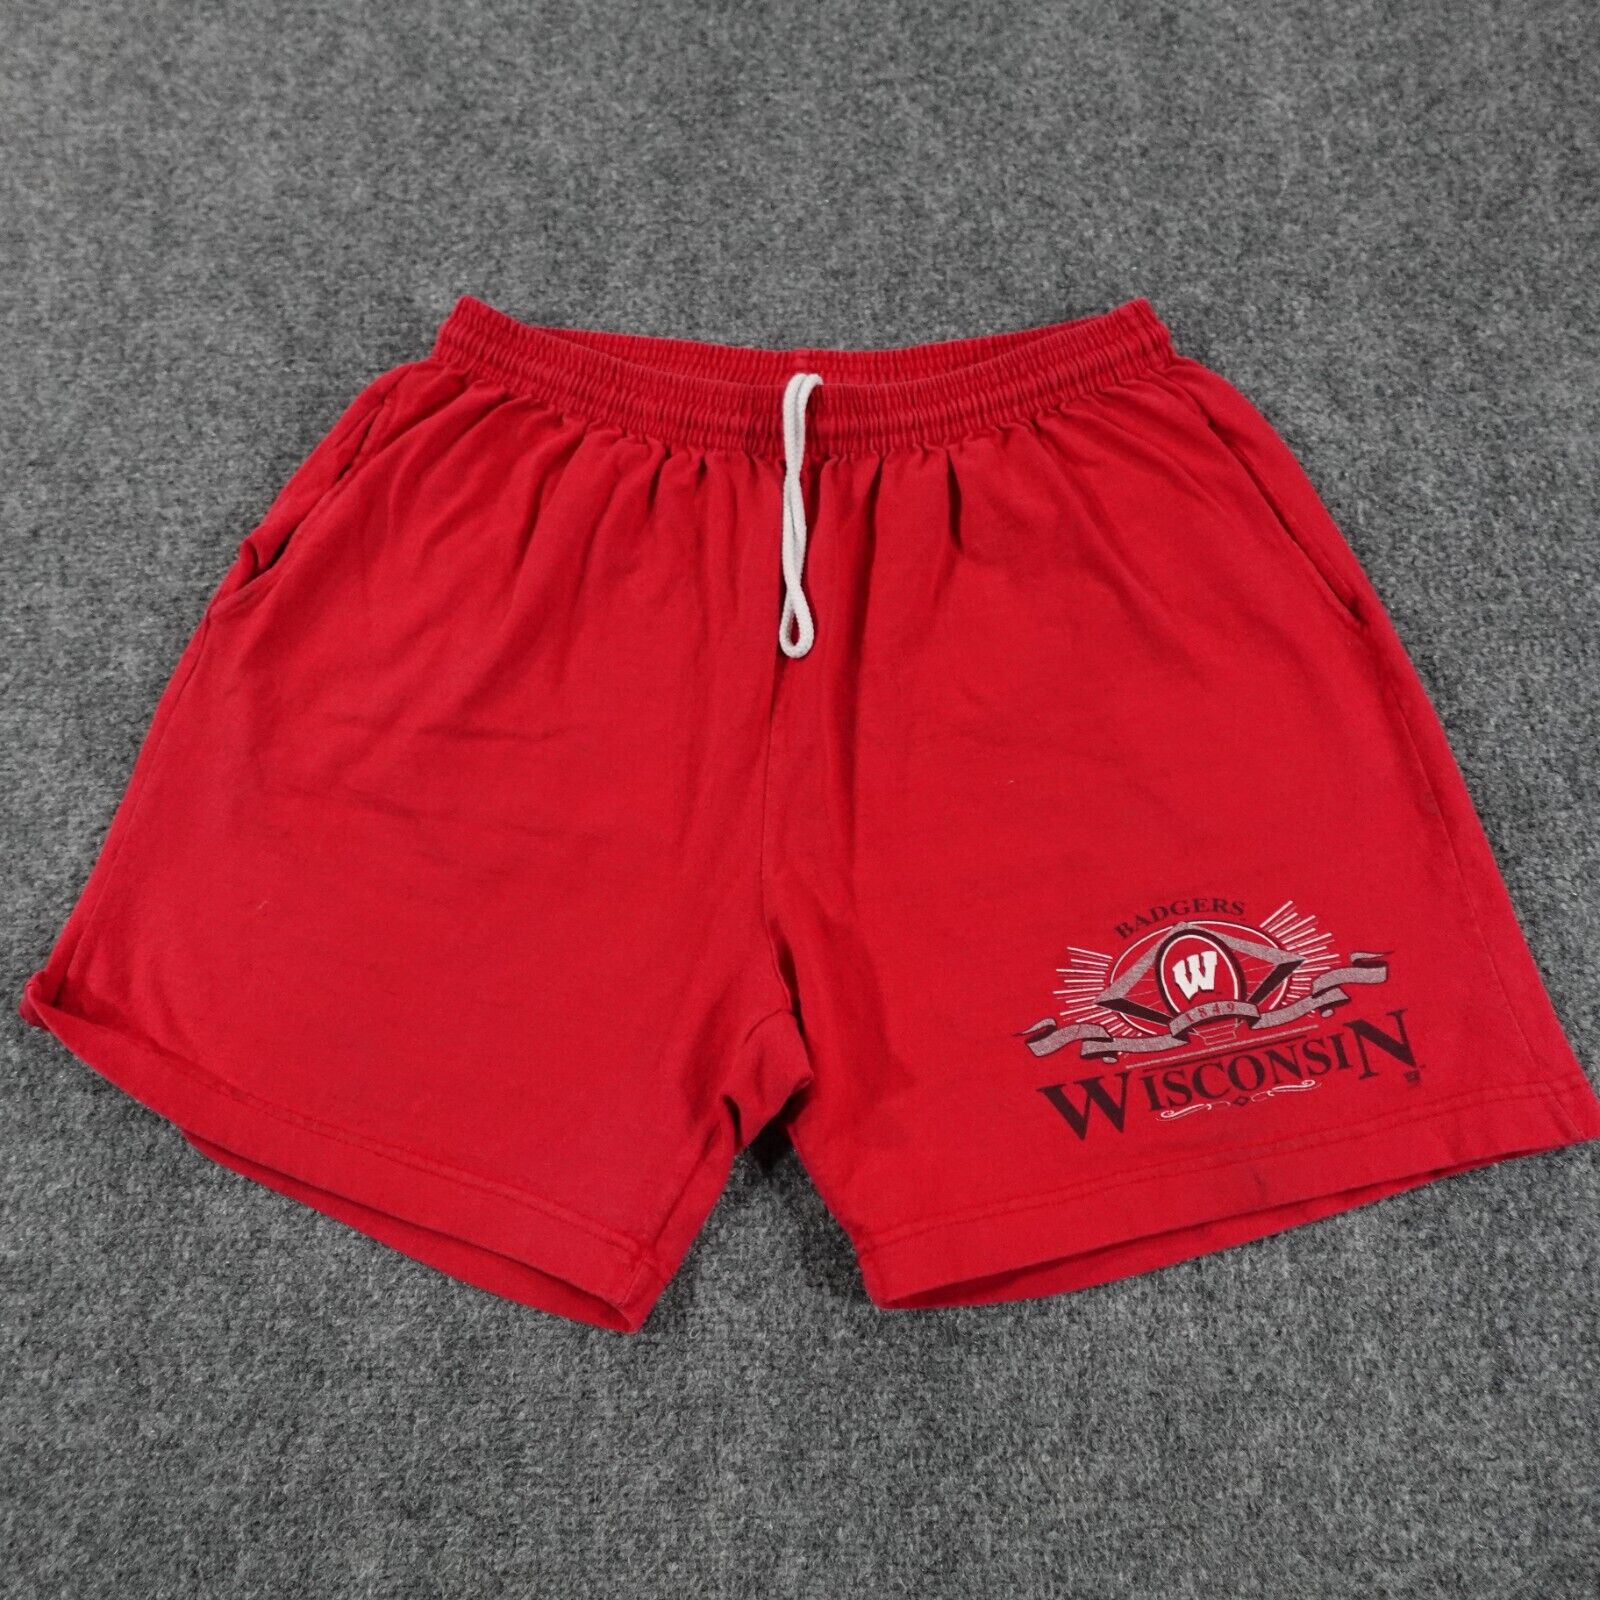 Wisconsin Badgers Shorts Men L Red Vintage Cotton Drawstring NCAA USA 90s 7942